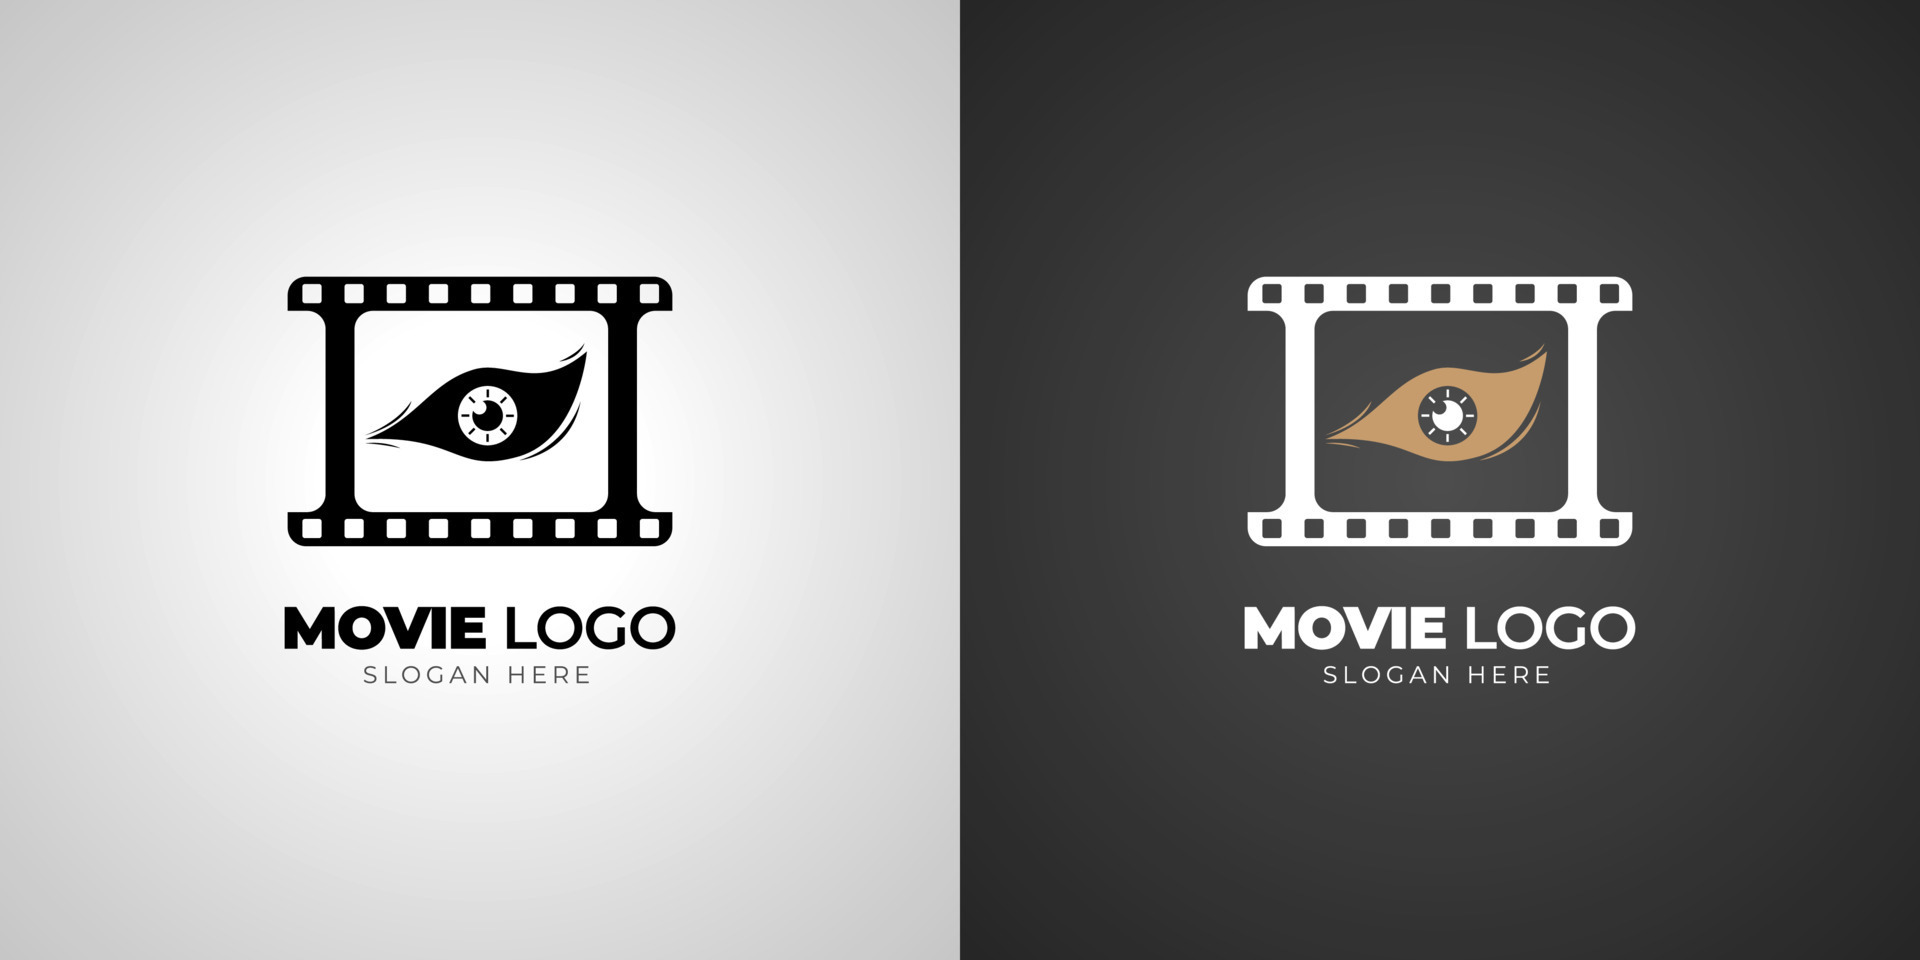 Premiere Vector Art, Icons, and Graphics for Free Download